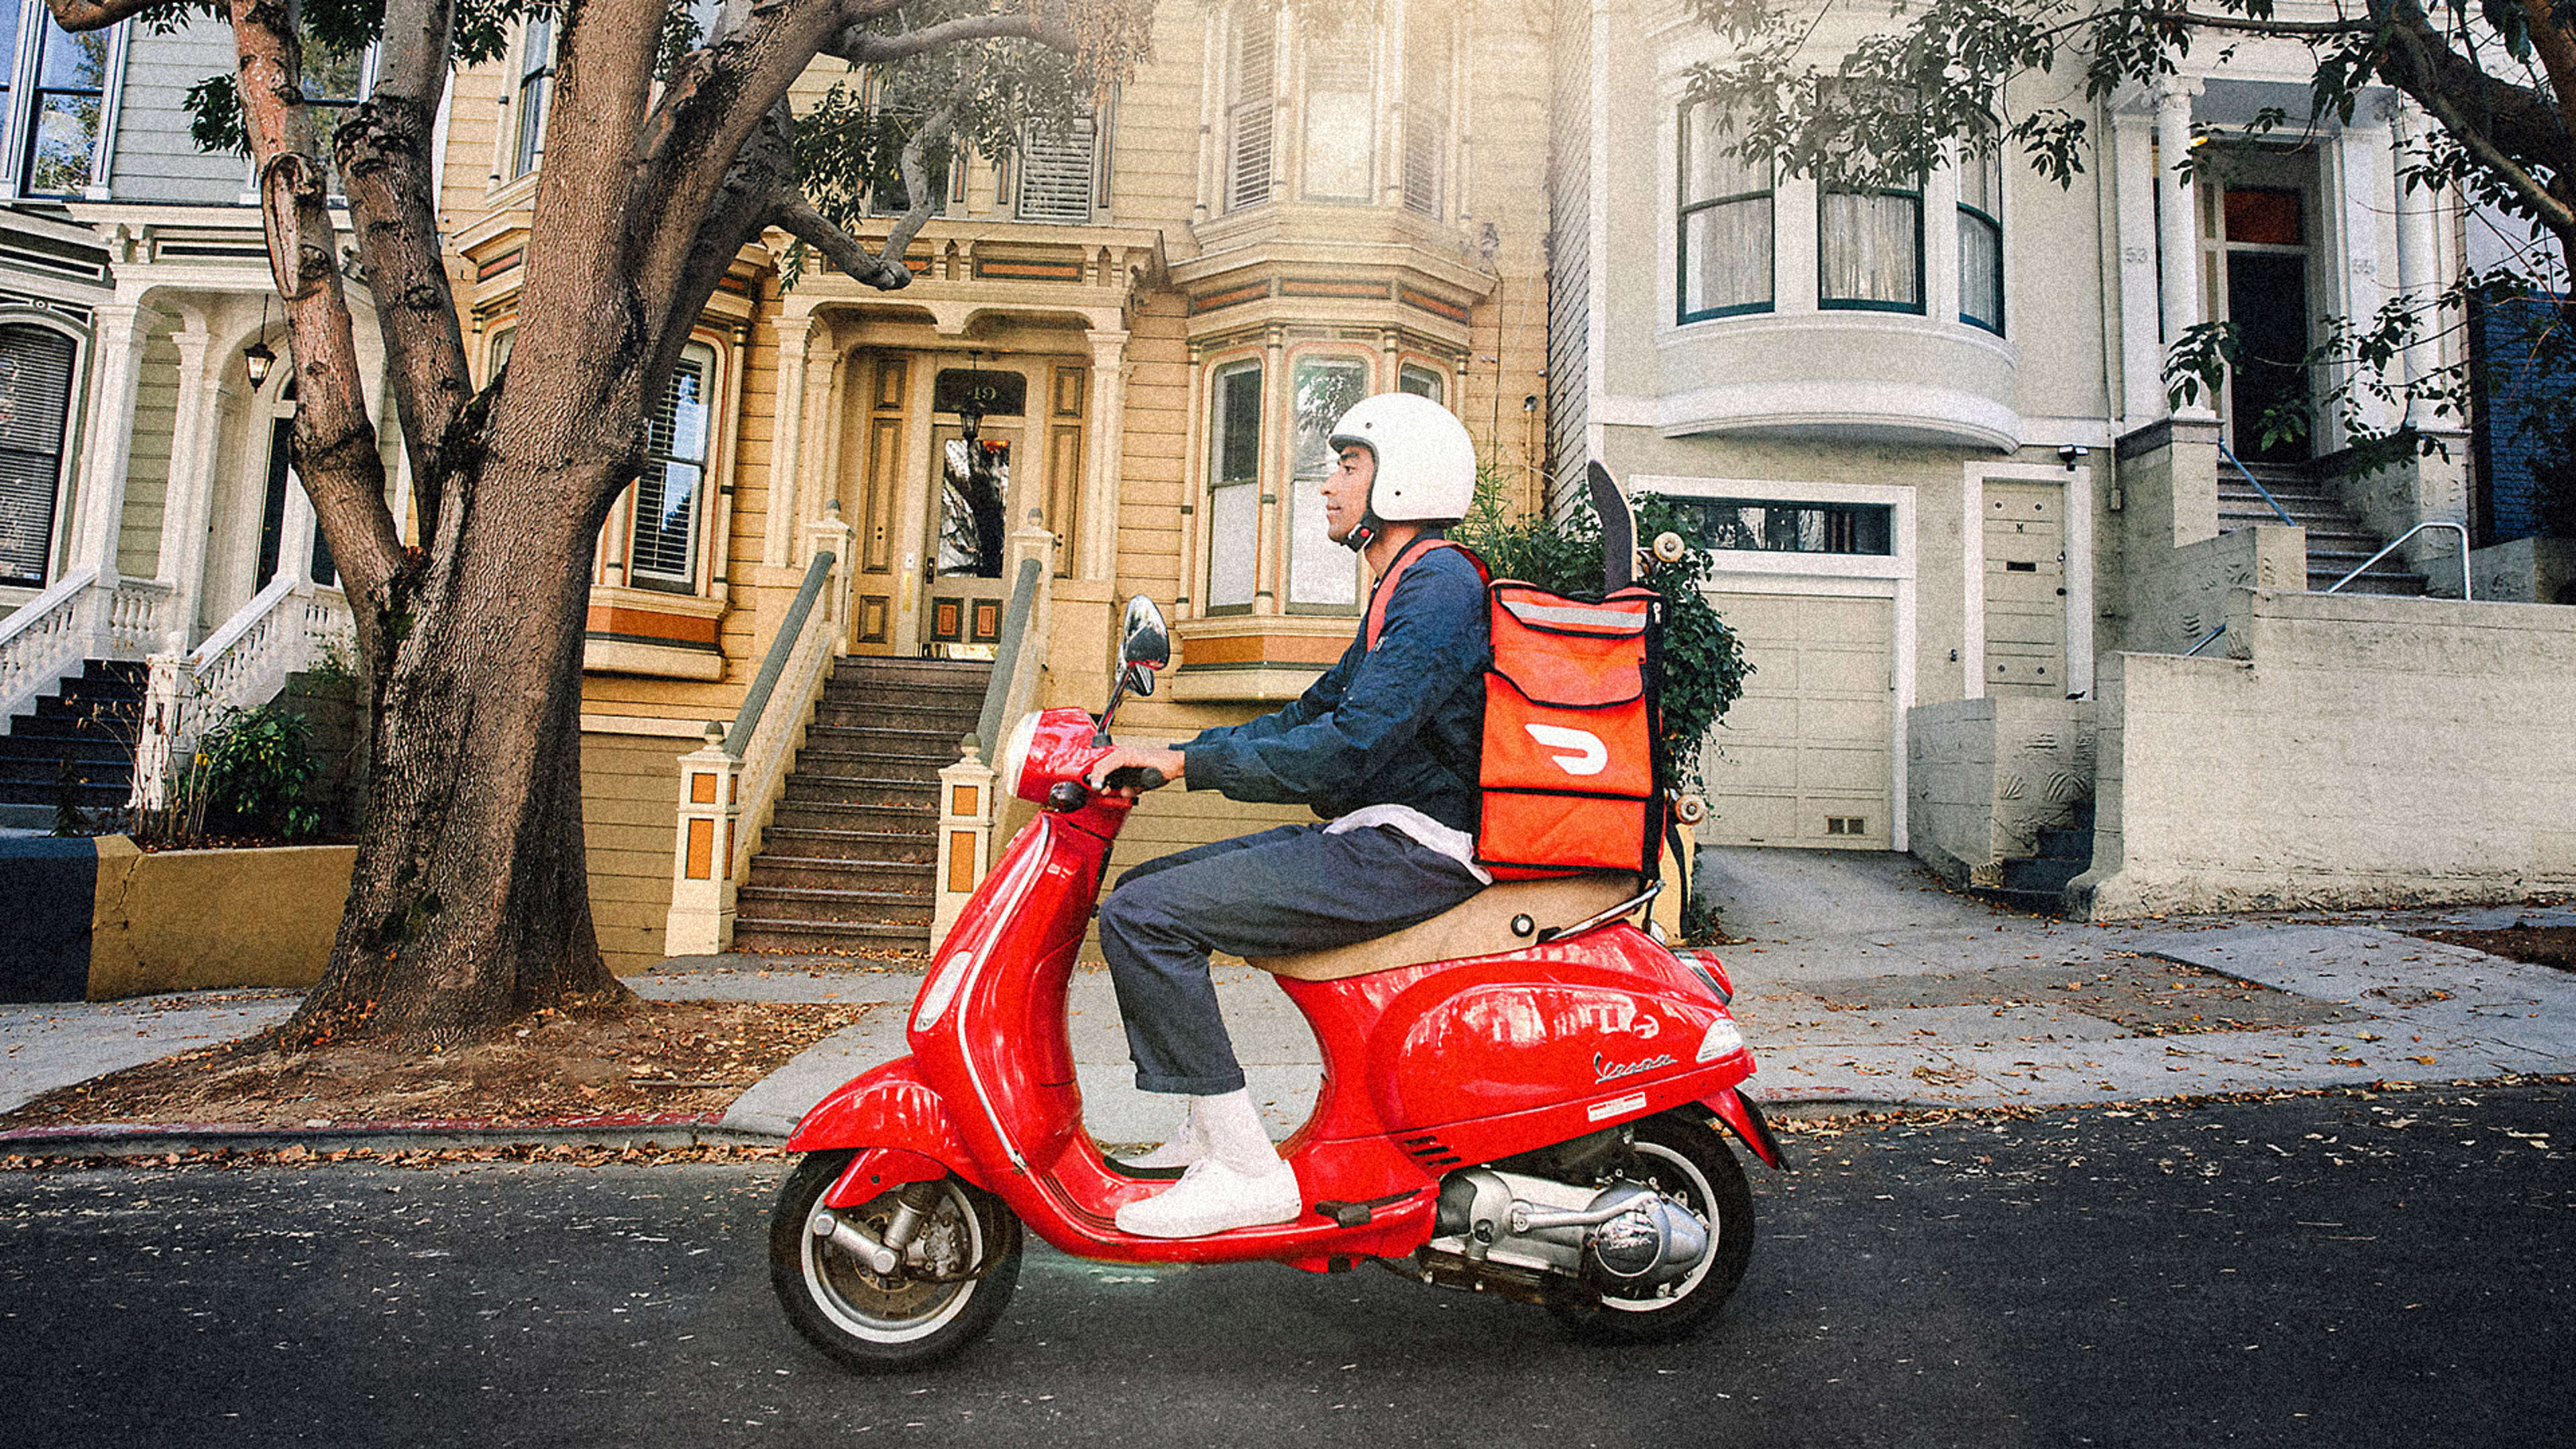 DoorDash Q4 earnings: Customers are ordering more delivery, but company posts wide net loss